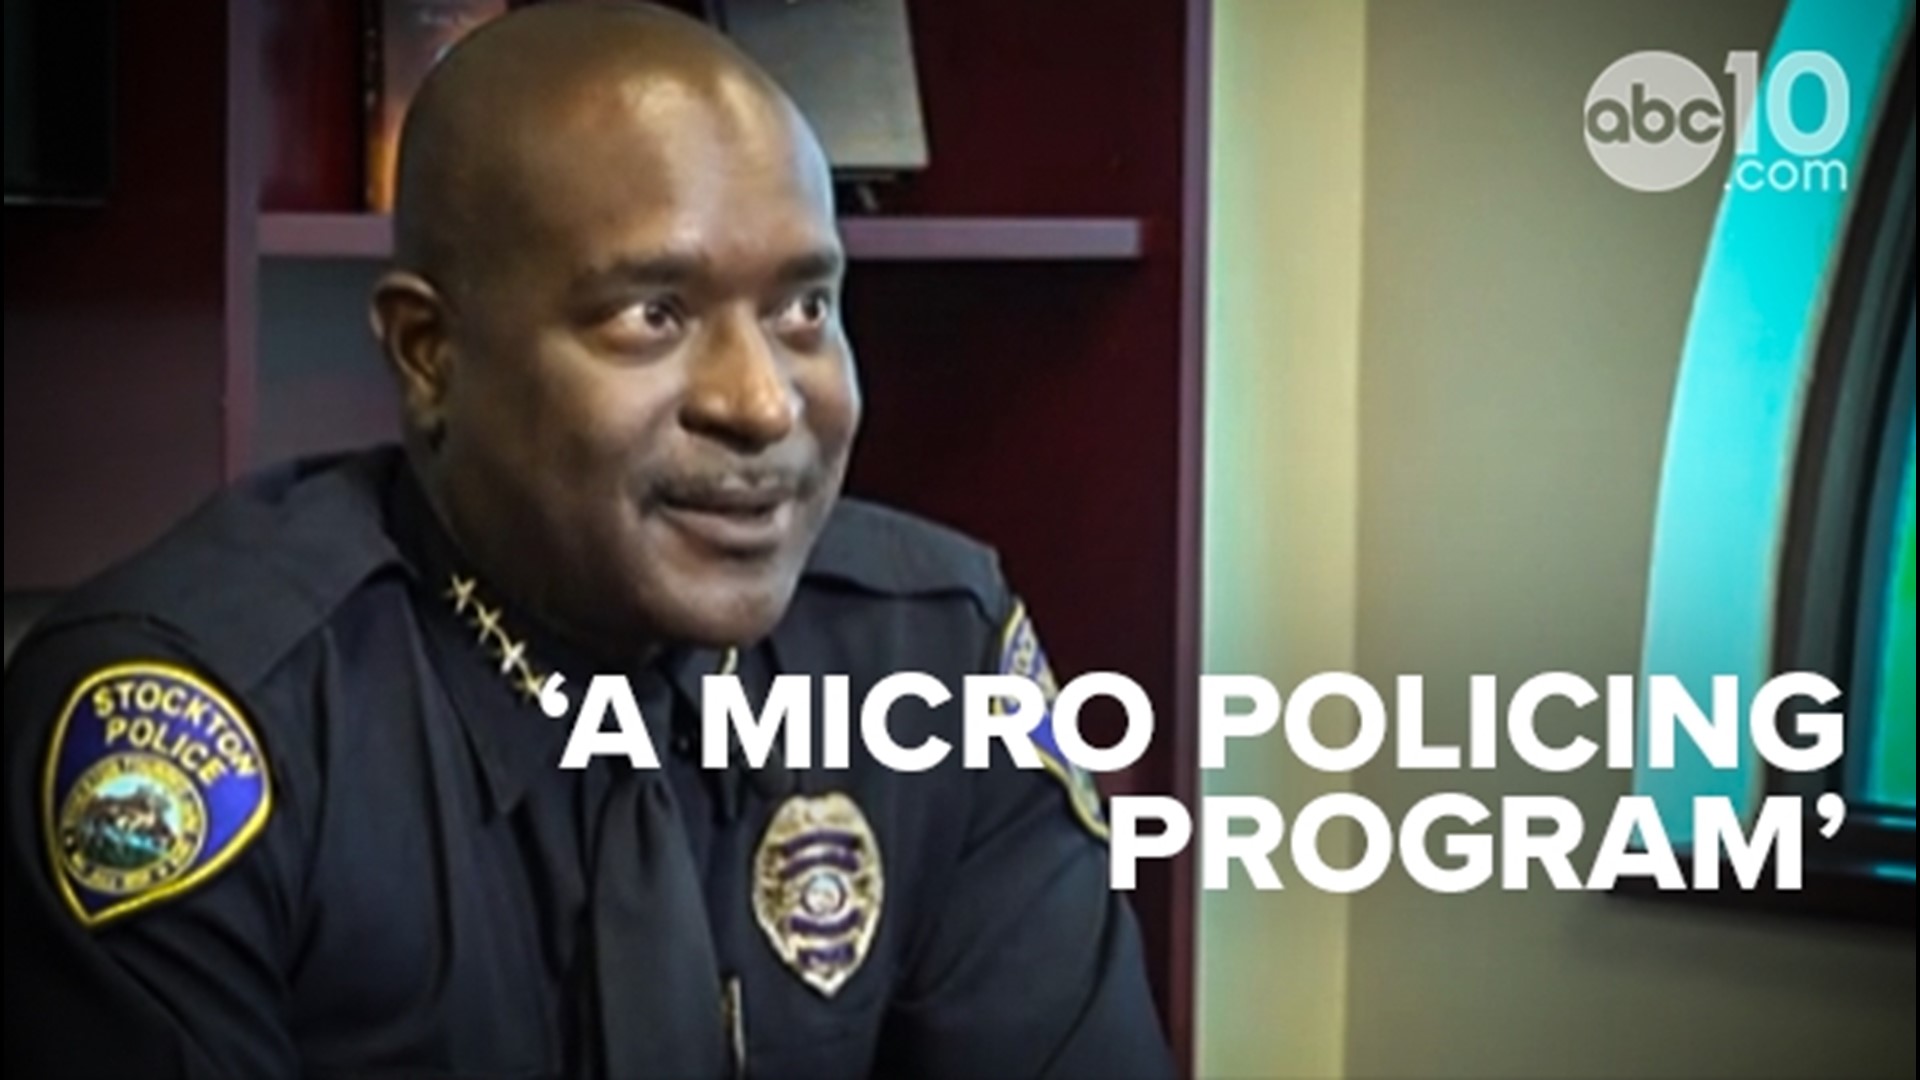 Stockton’s new Chief of Police Stan McFadden said you can't have the same type of policing for every neighborhood, and will develop his 'micro policing' plan.